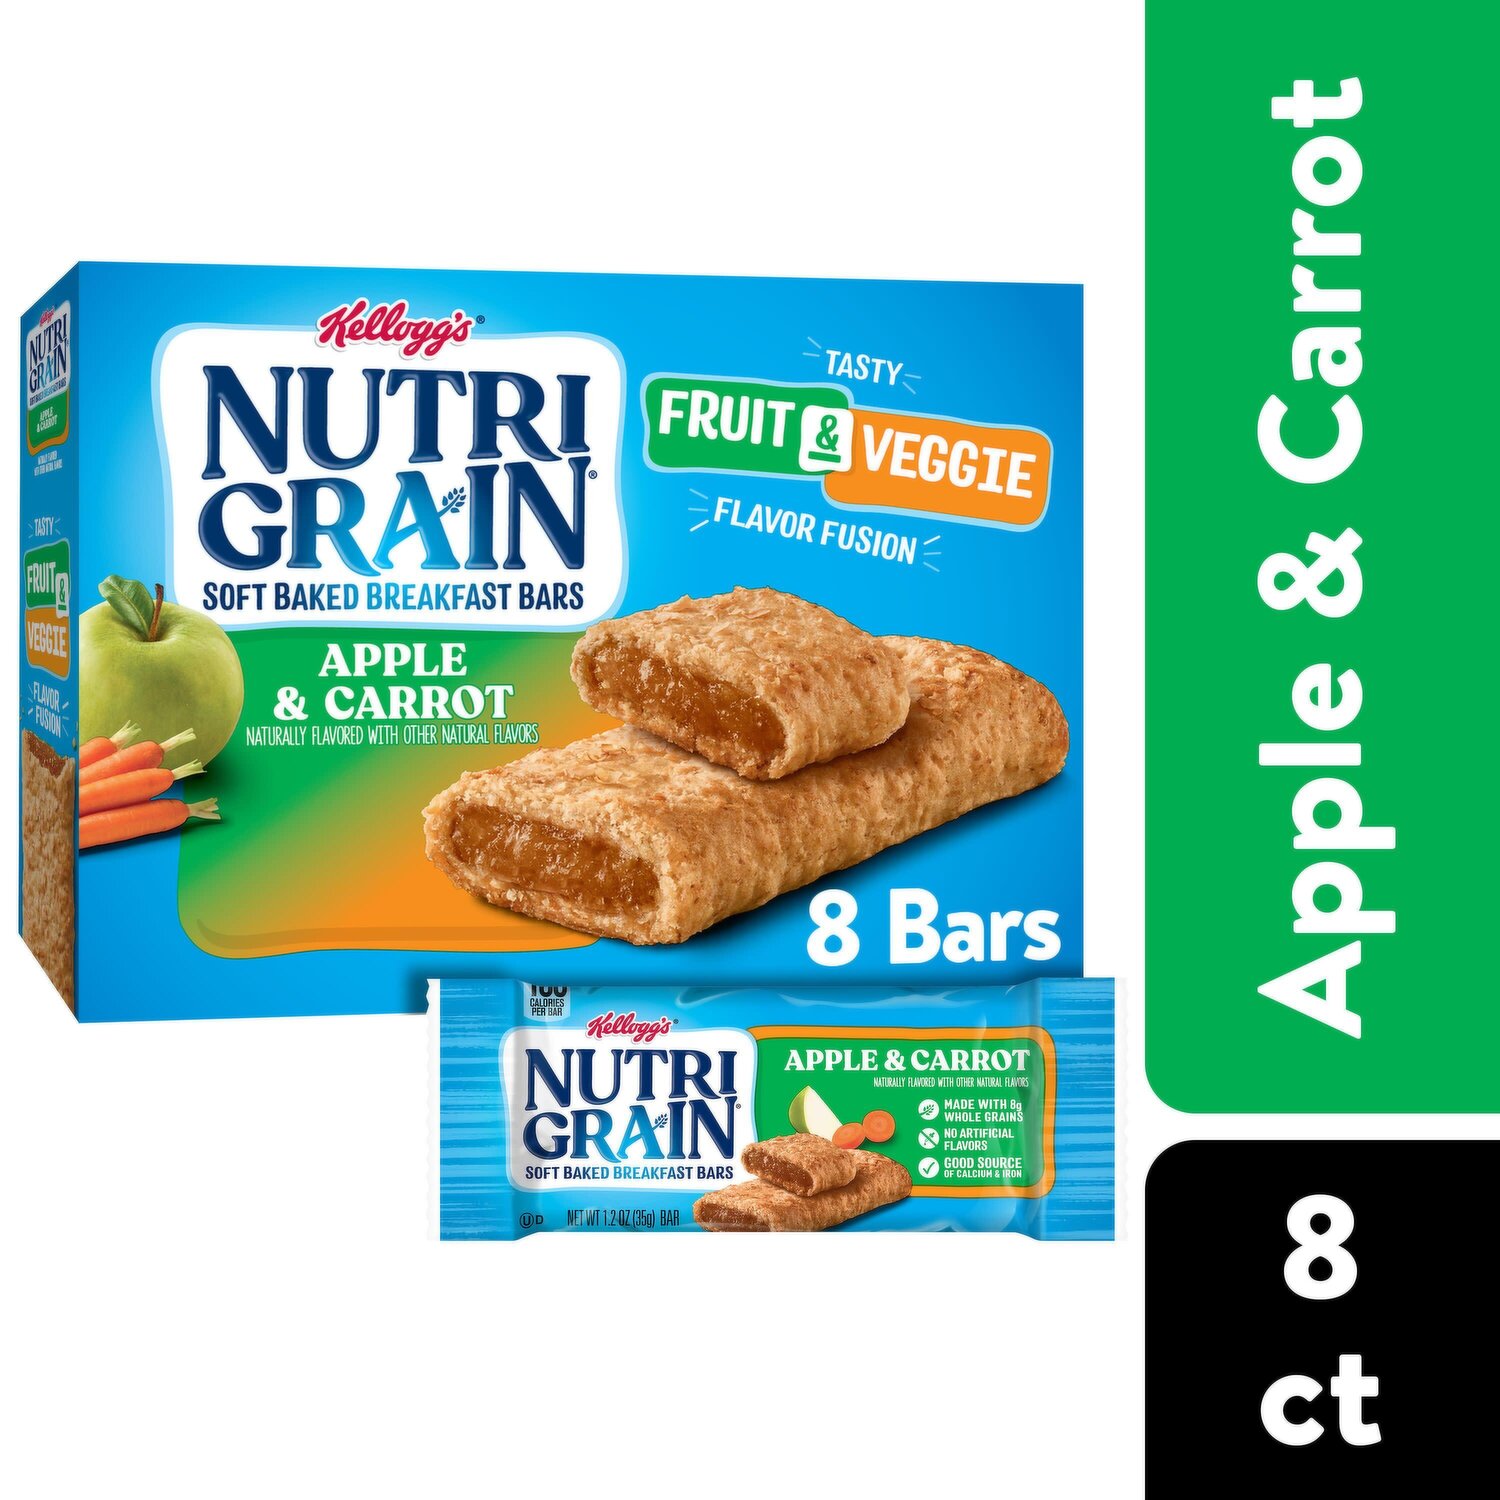 Nature Valley Savory Nut Crunch Bars, Everything Bagel, 5 Bars, 4.45 OZ 